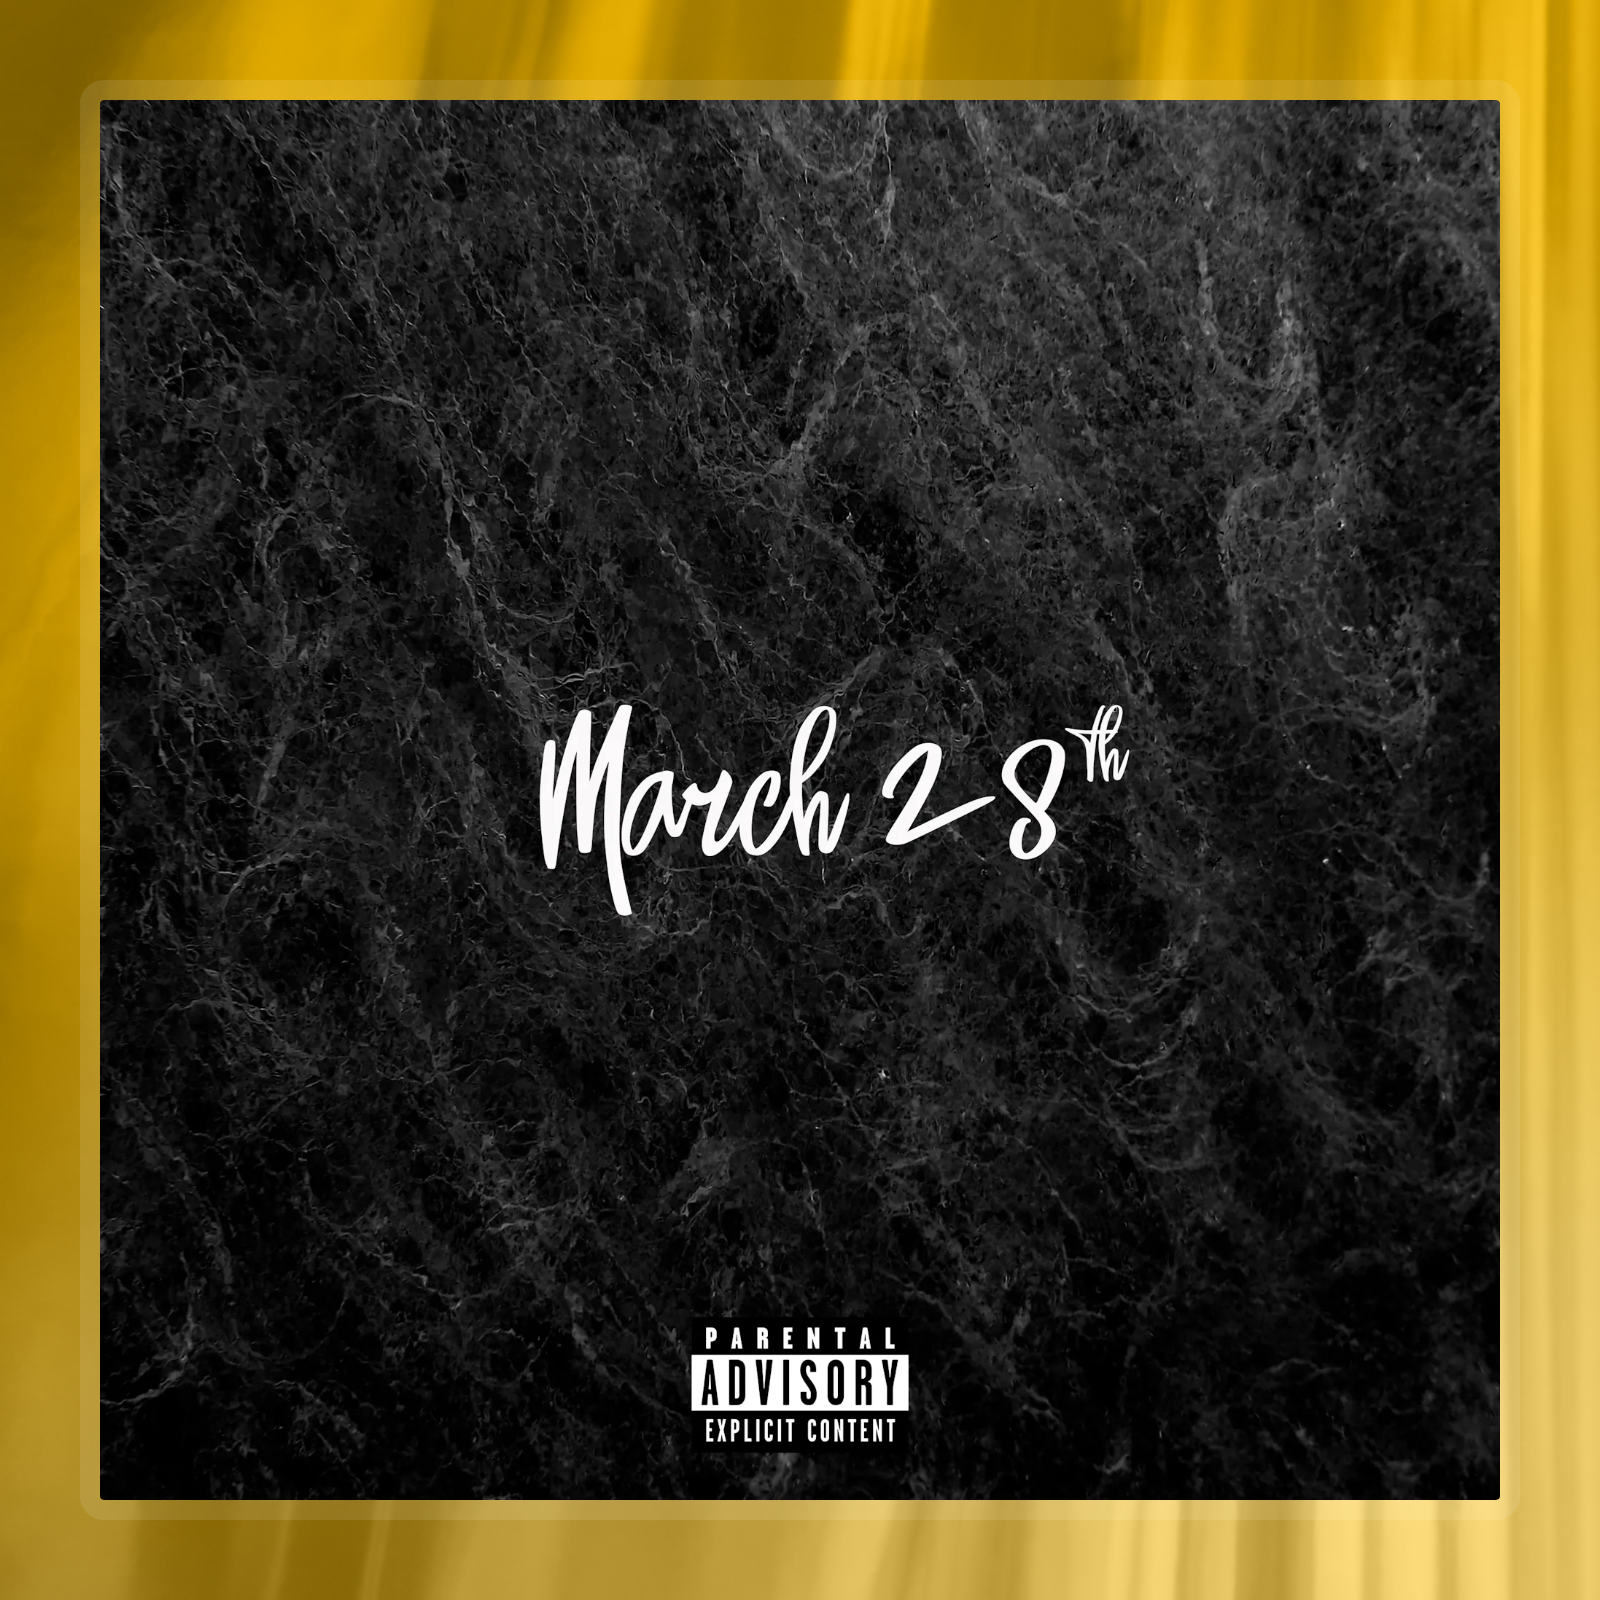 March 28th